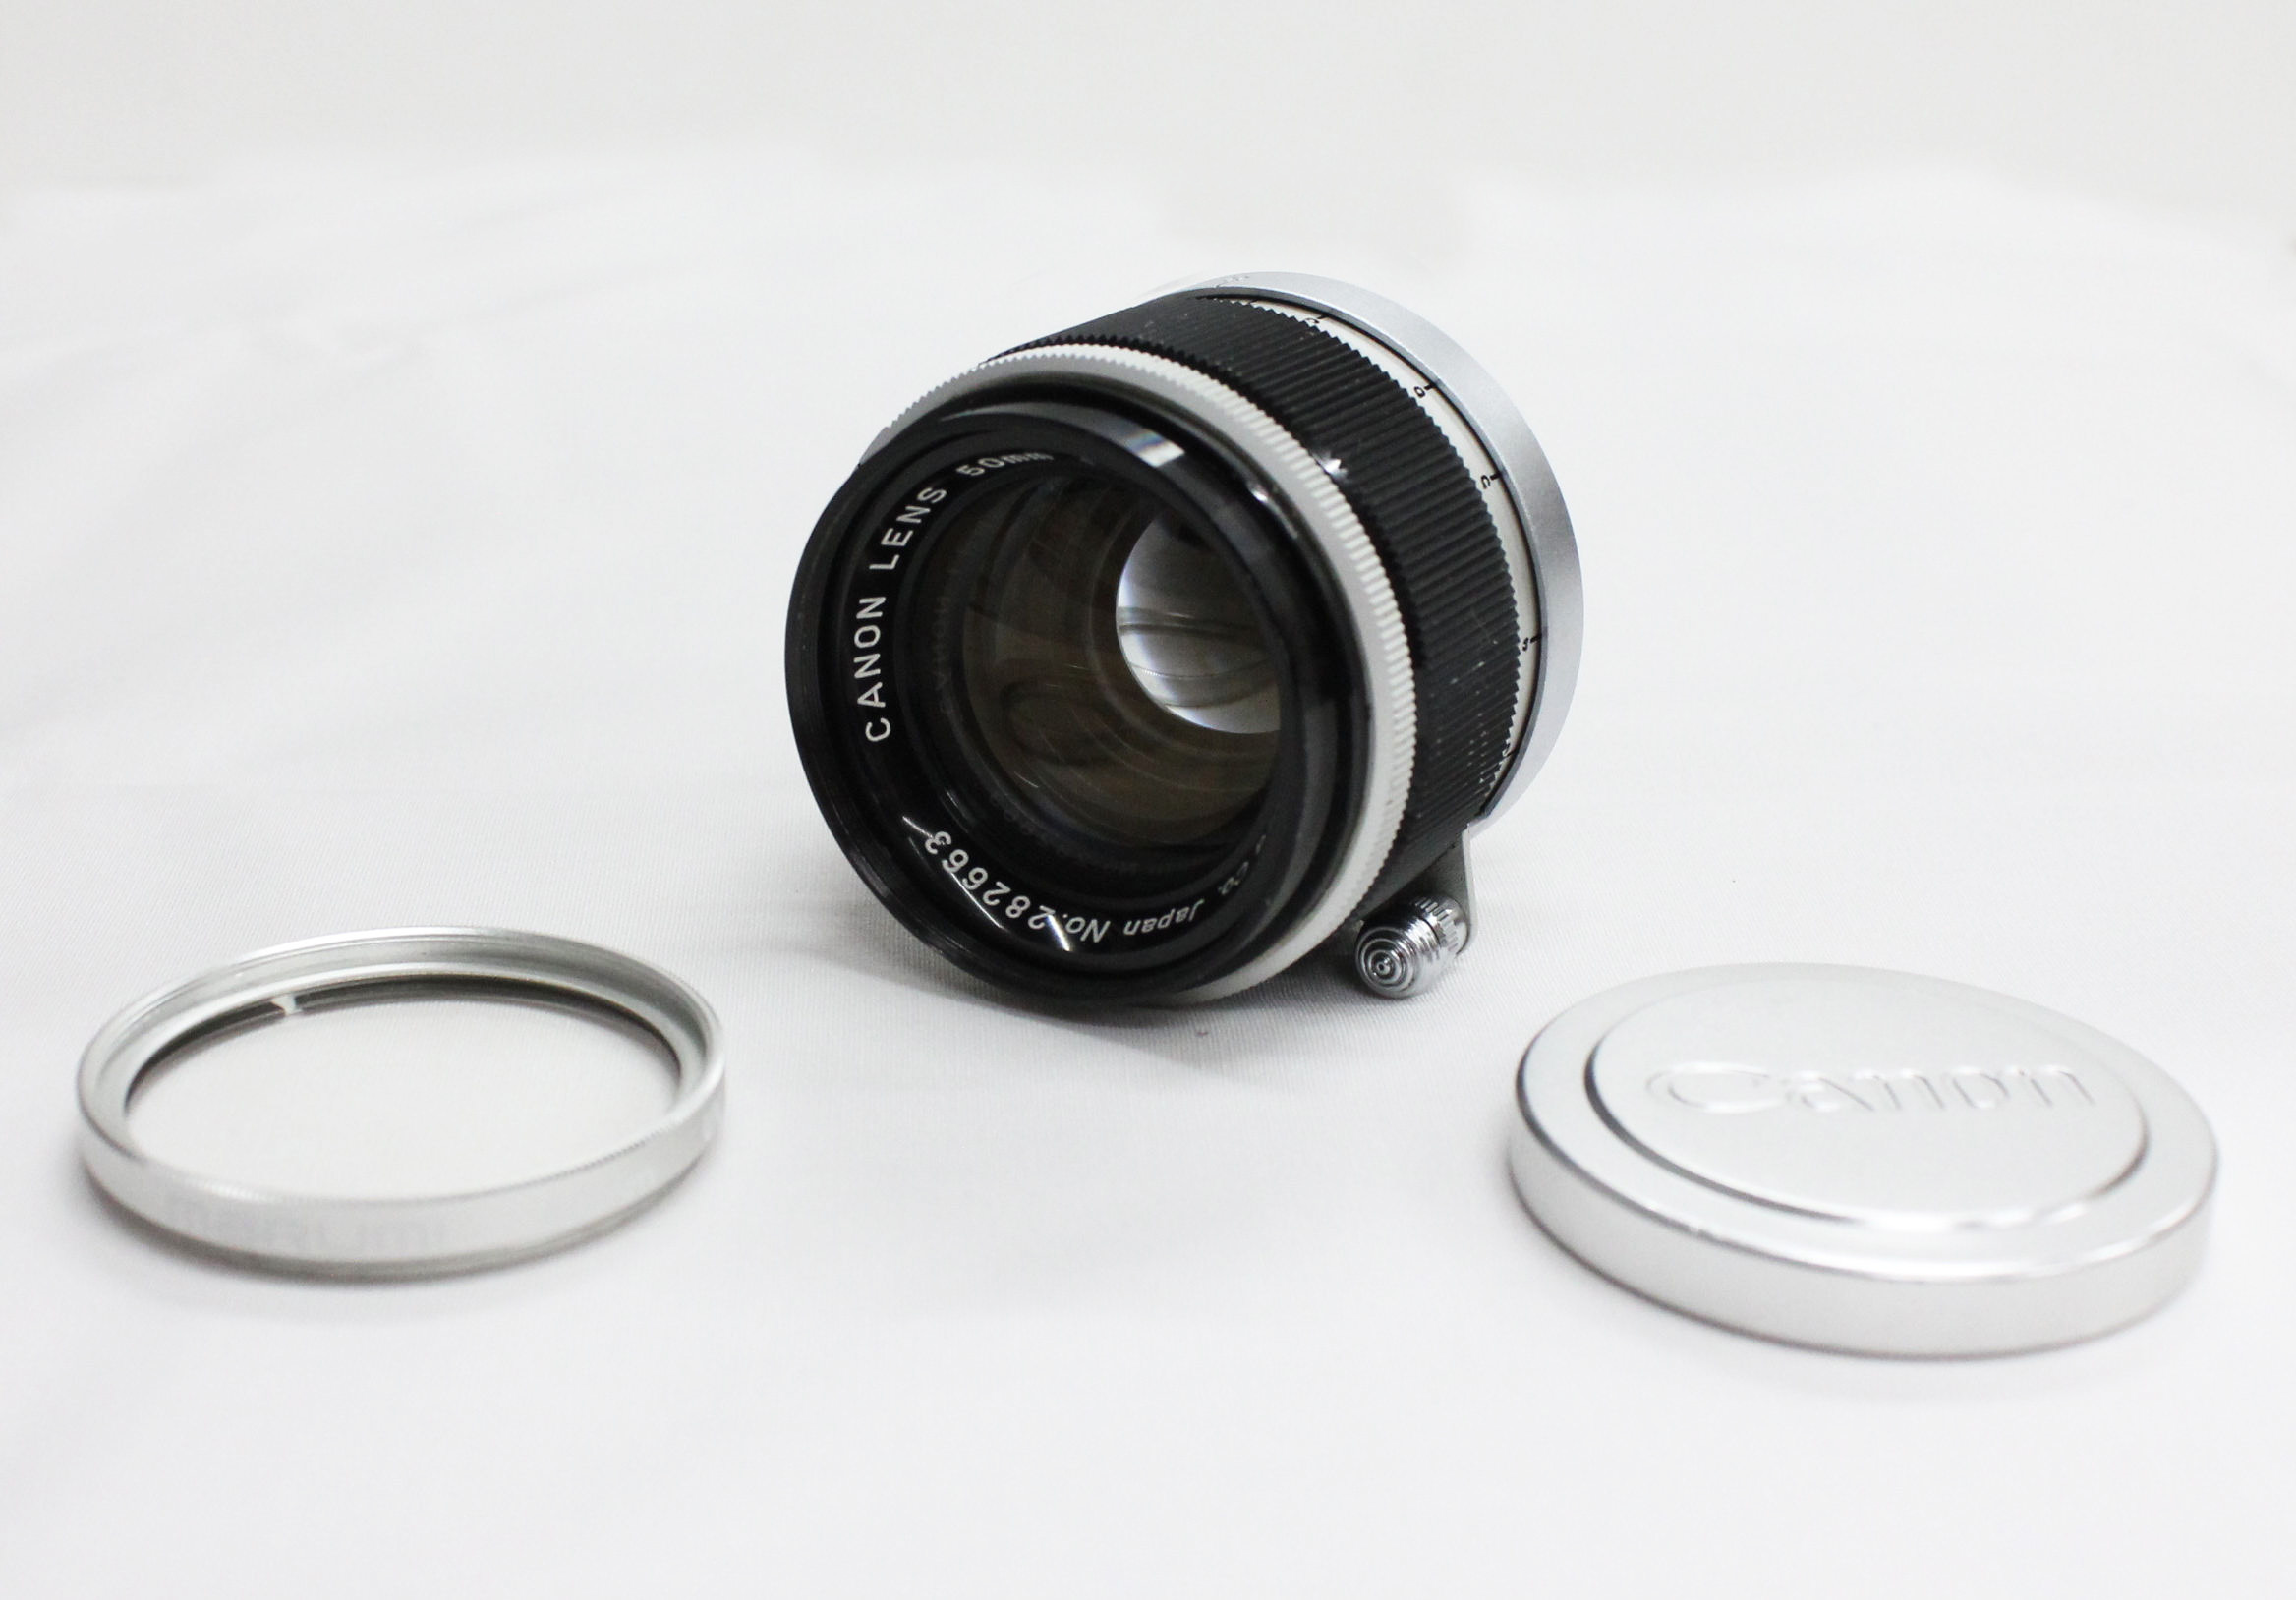 Japan Used Camera Shop | [Ex+] Canon 50mm F/1.8 Leica L39 Screw Mount Lens from Japan